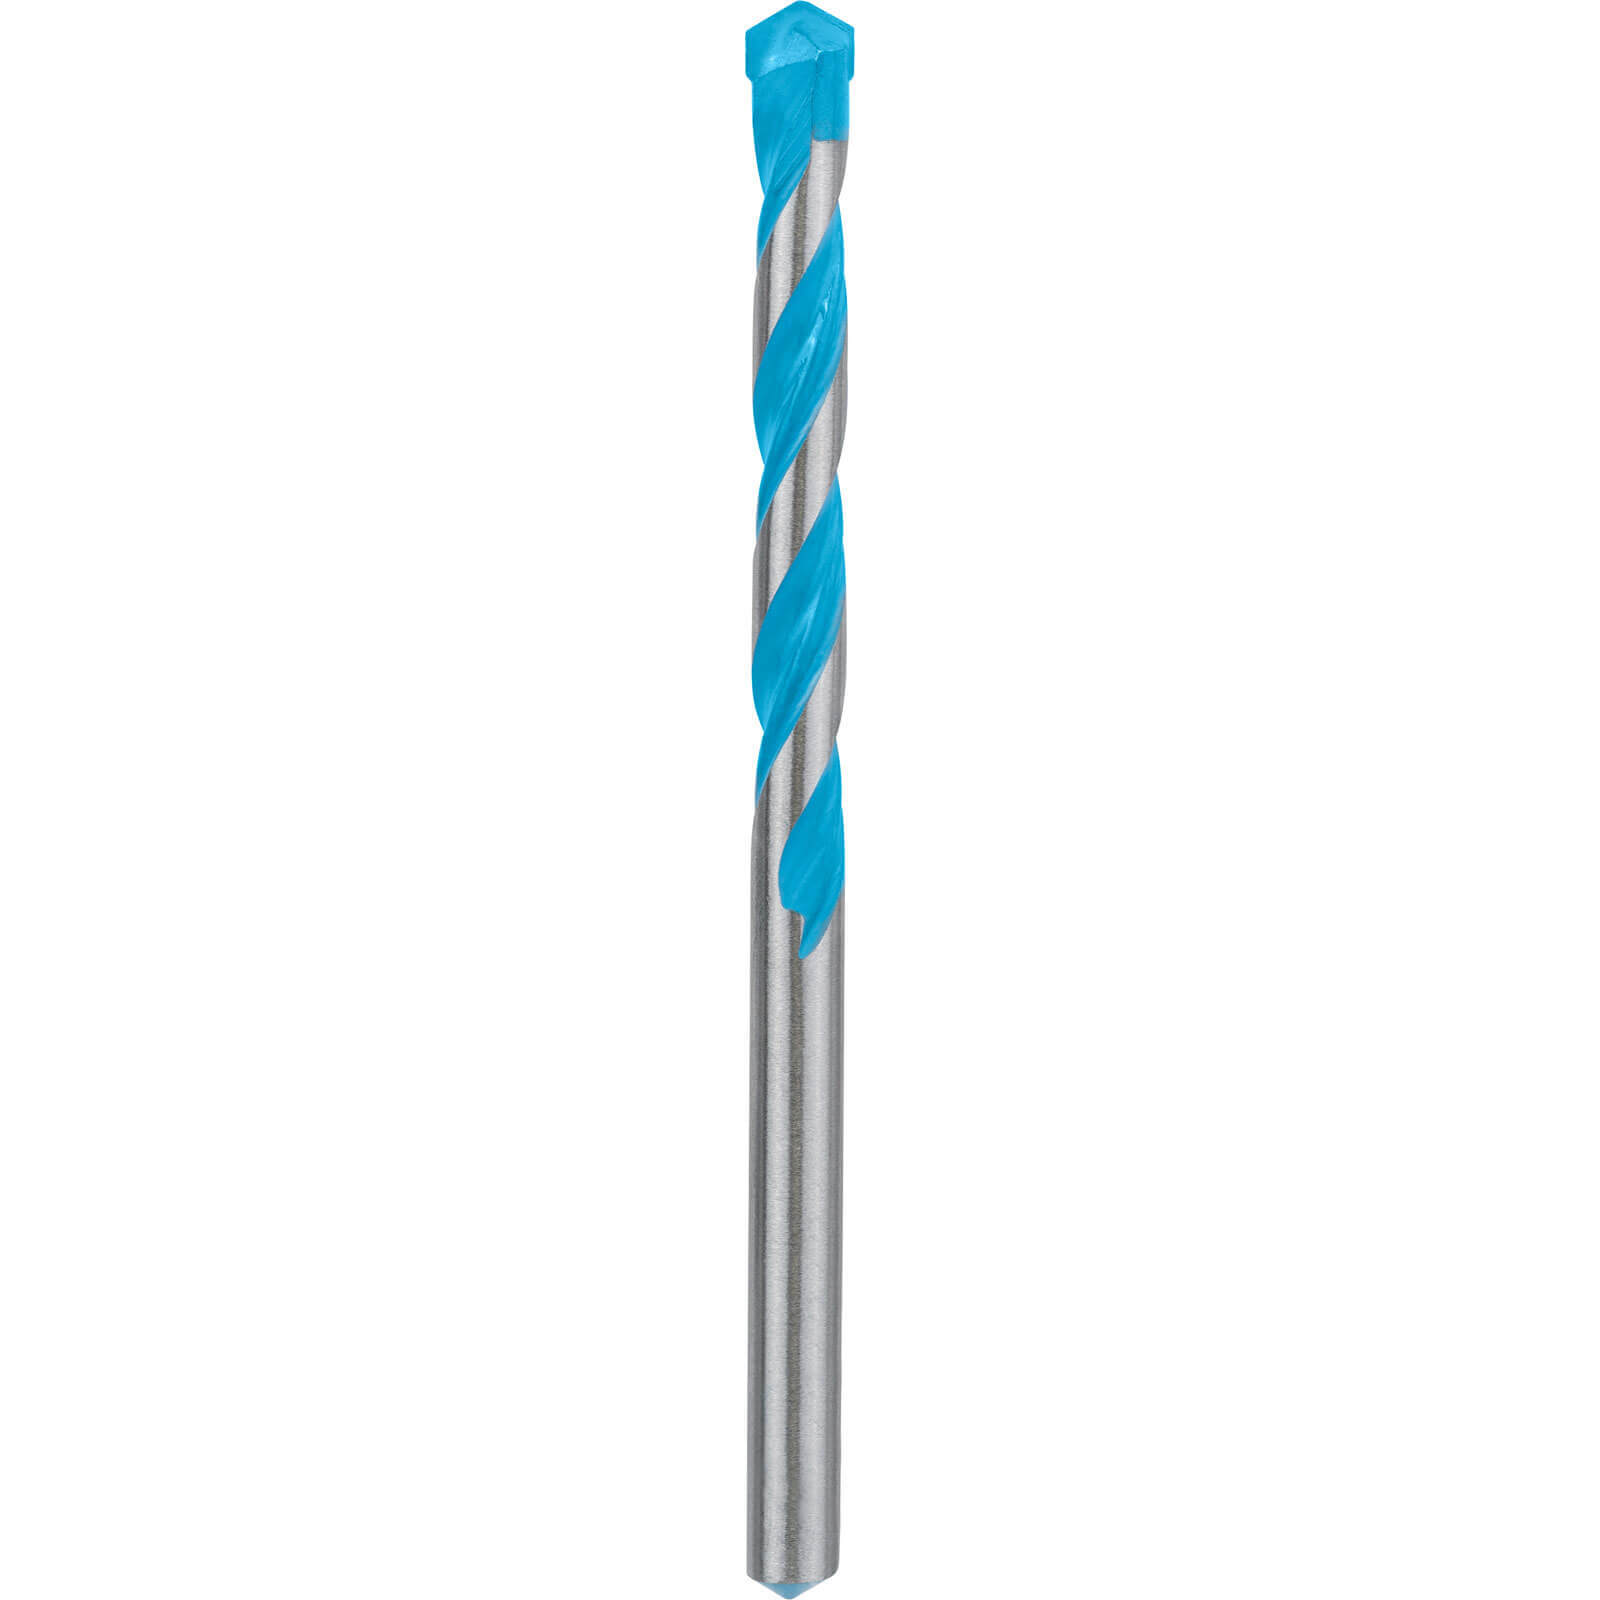 Image of Bosch Expert CYL-9 Multi Construction Drill Bit 8mm 120mm Pack of 10